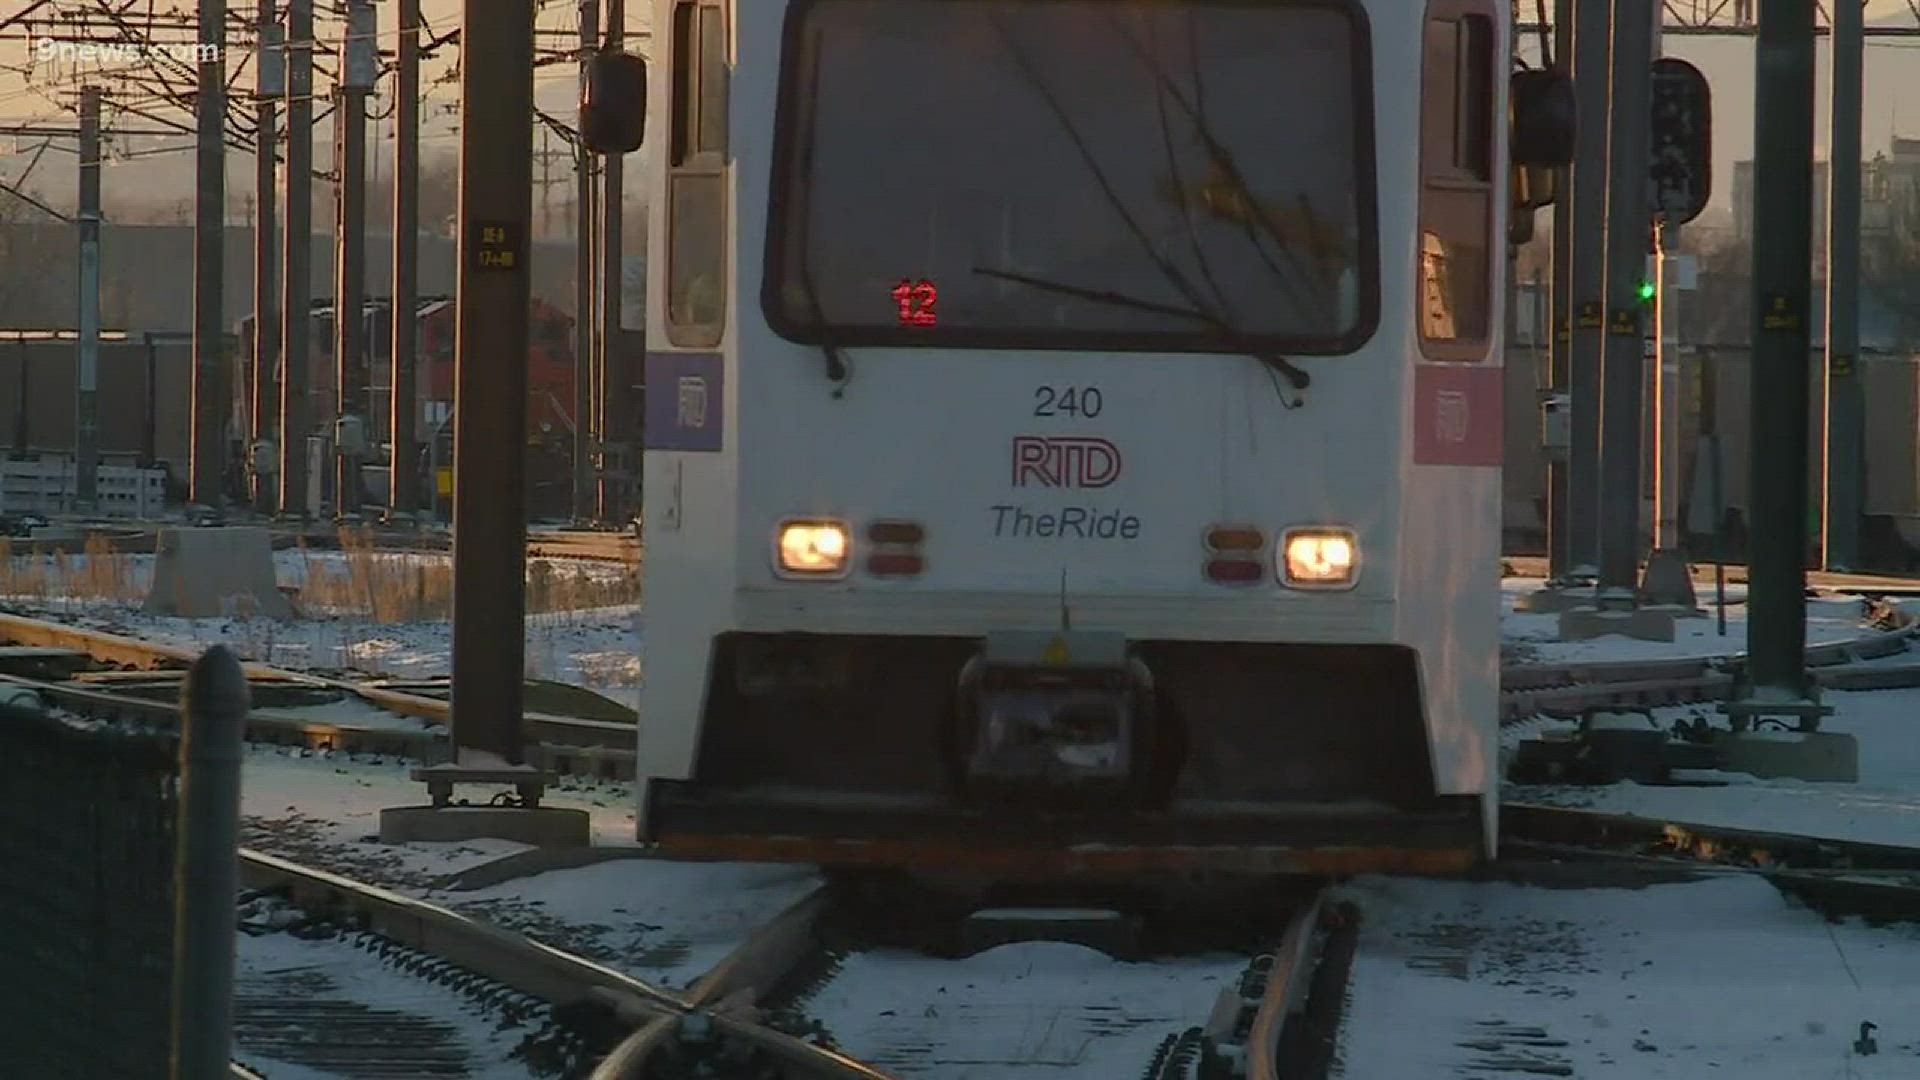 An increase to RTD bus and rail line fares took effect early Wednesday morning. These changes were approved by the board in September.